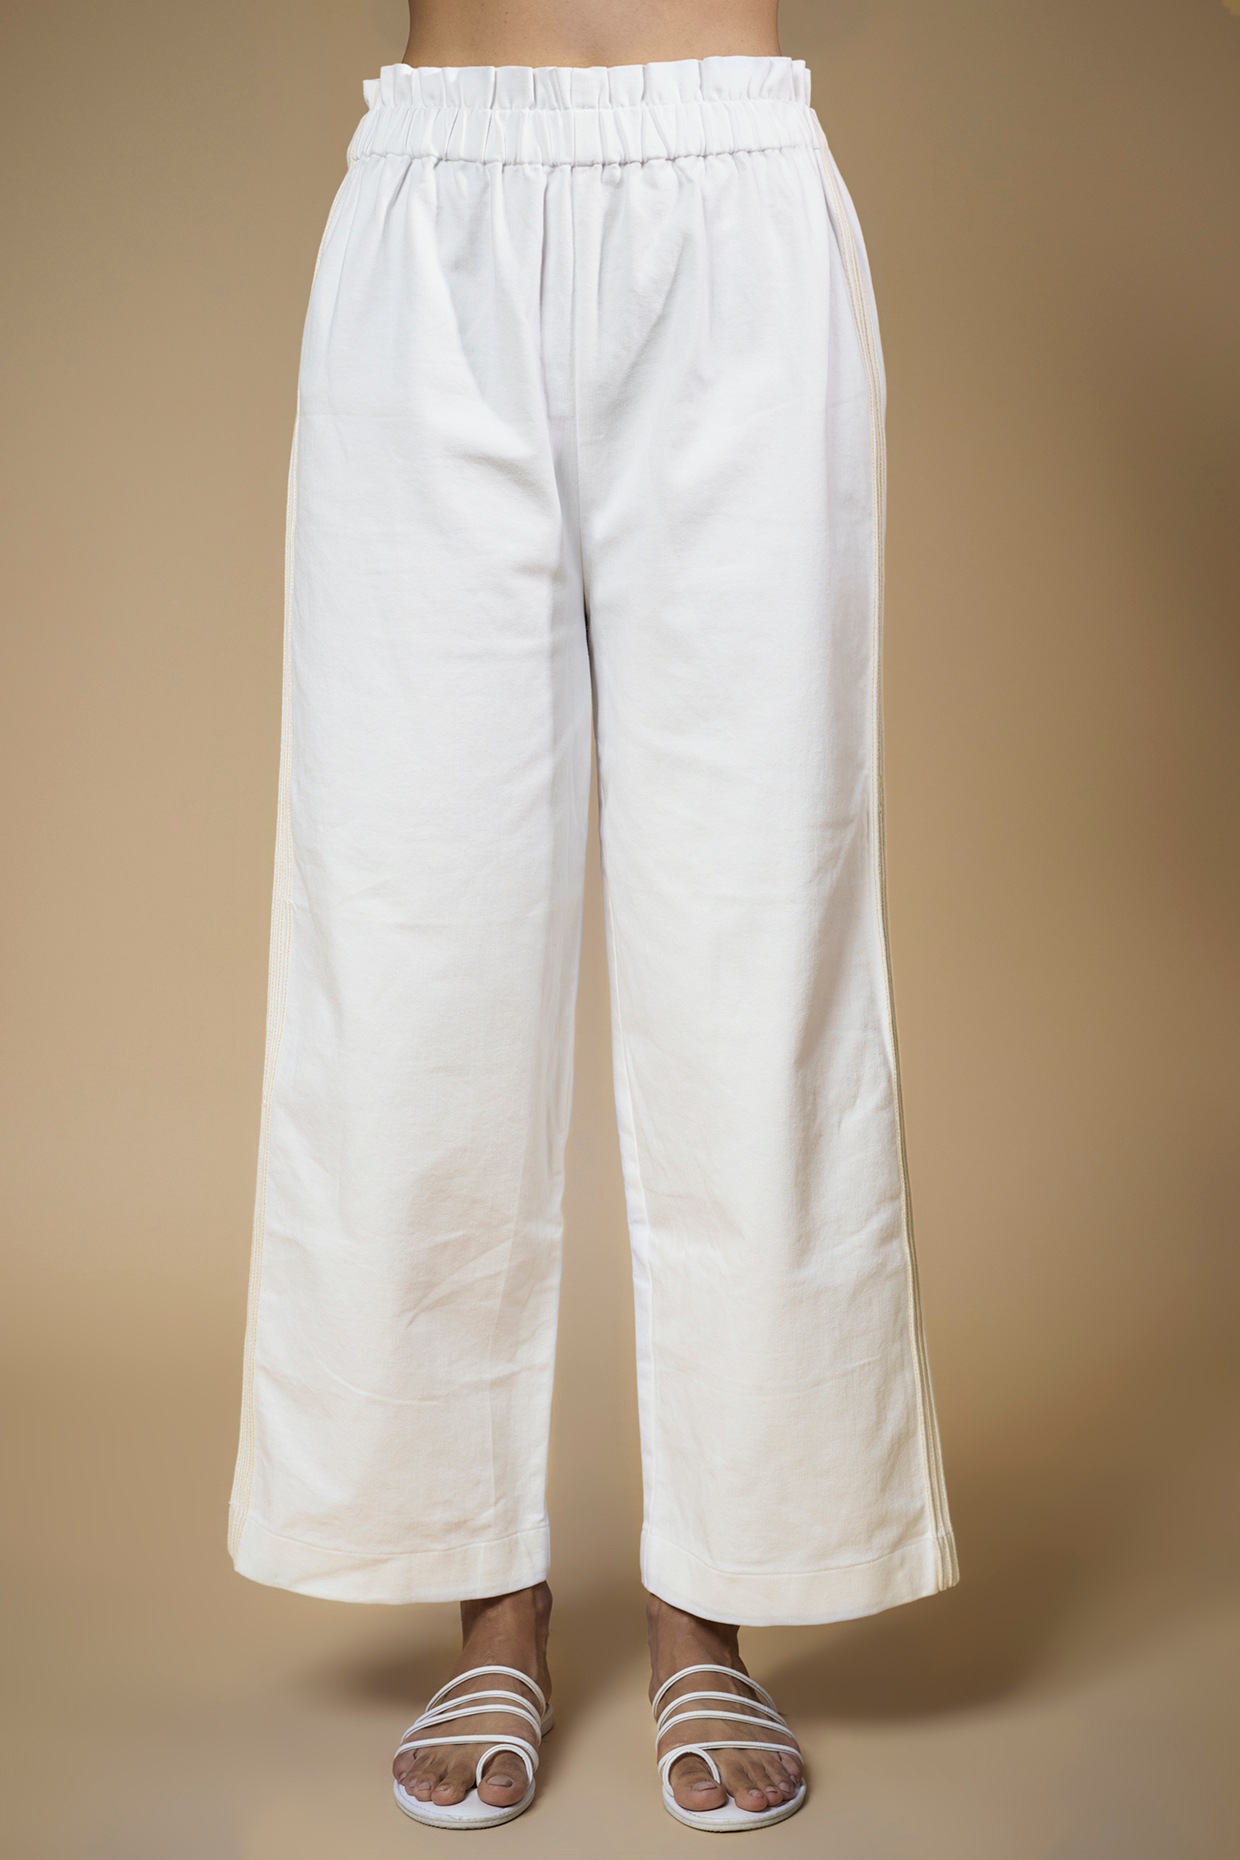 commando Women's Faux Leather Paperbag Pants, White, XS at Amazon Women's  Clothing store